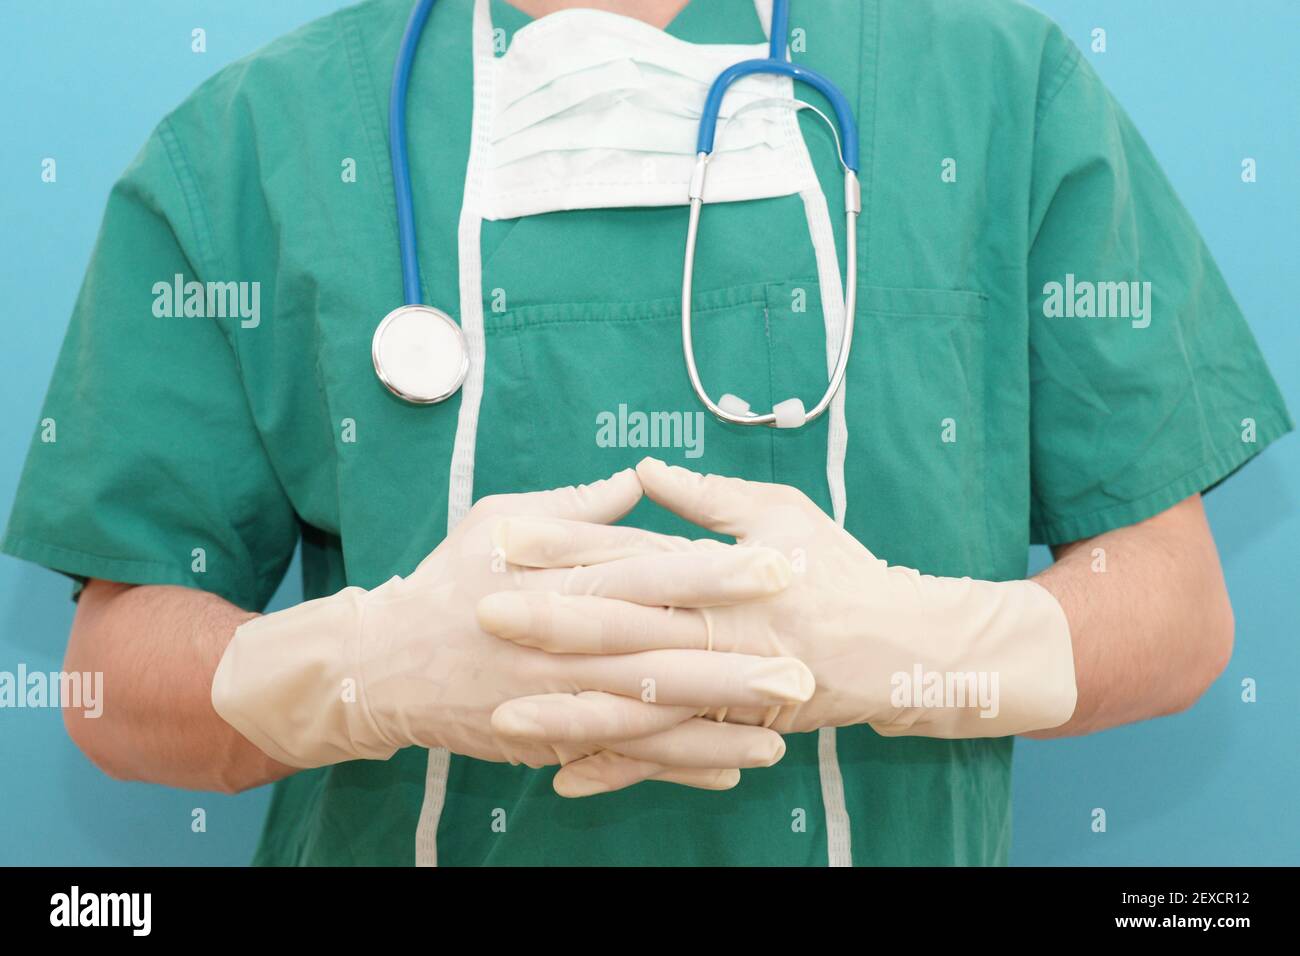 Surgeon explains surgical method doctor with rubber gloves explanation gesture Stock Photo